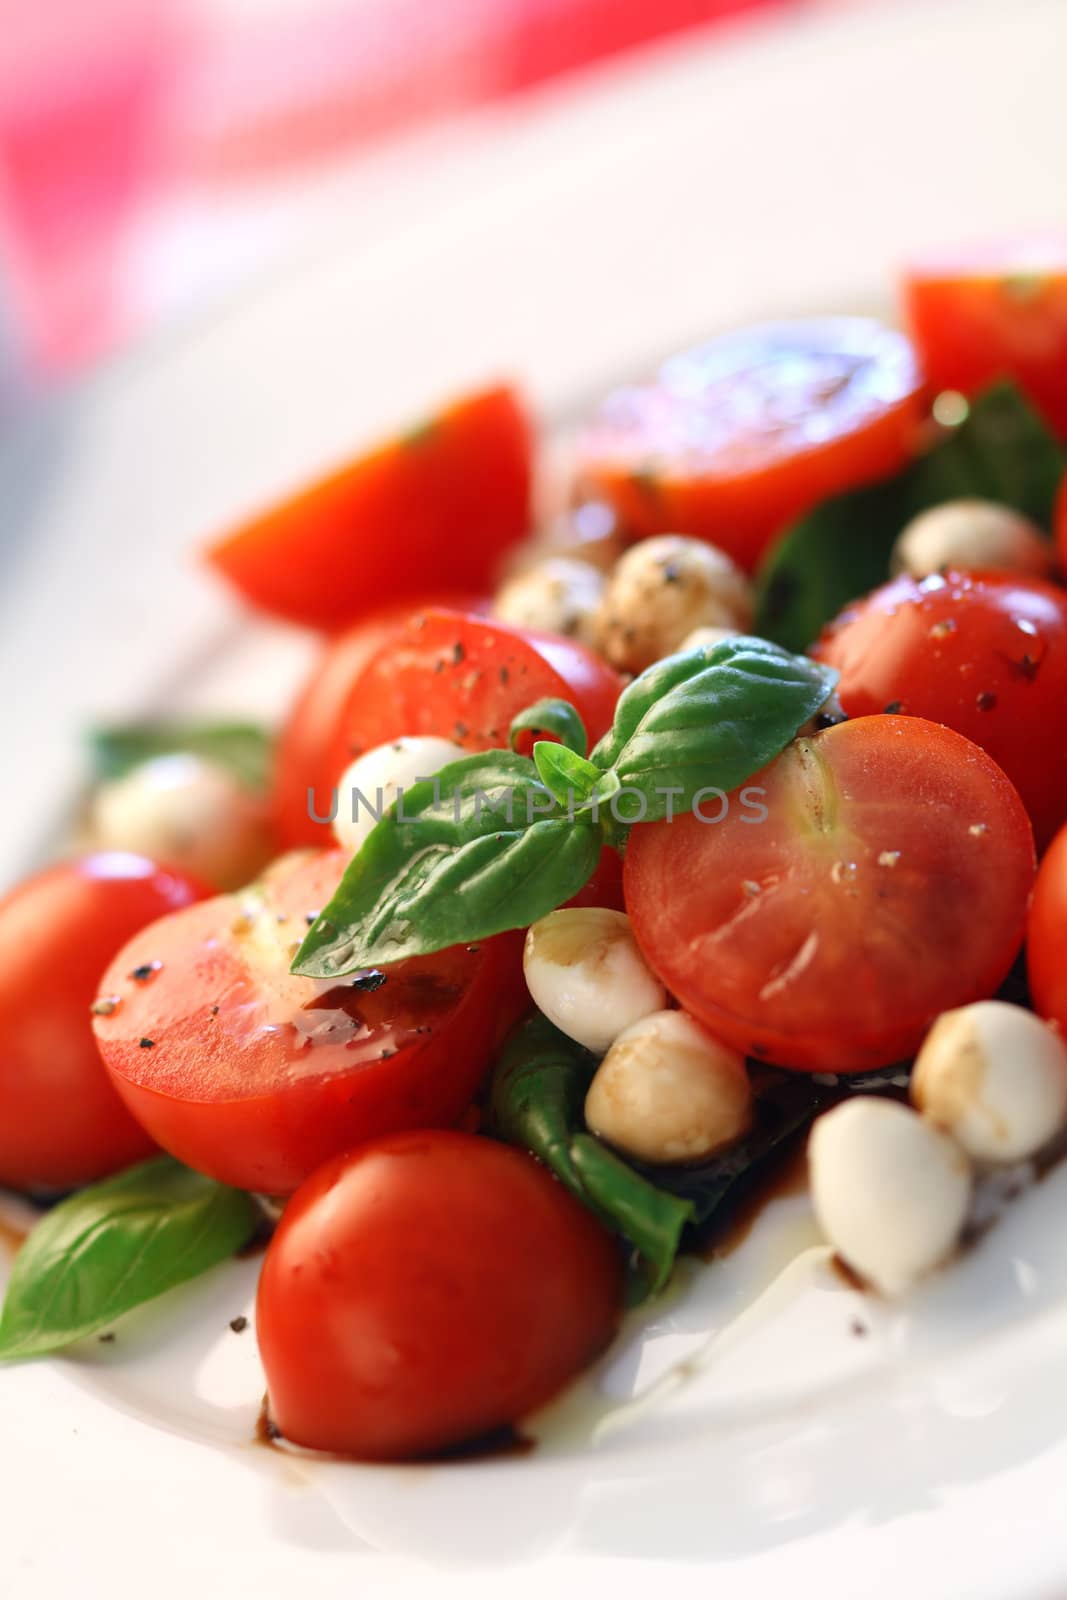 Macro photo of a Caprese salad with tomato, mozzarella, basil, balsamic and olive oil. Very shallow depth of field, focusing on the basil leaves on top.